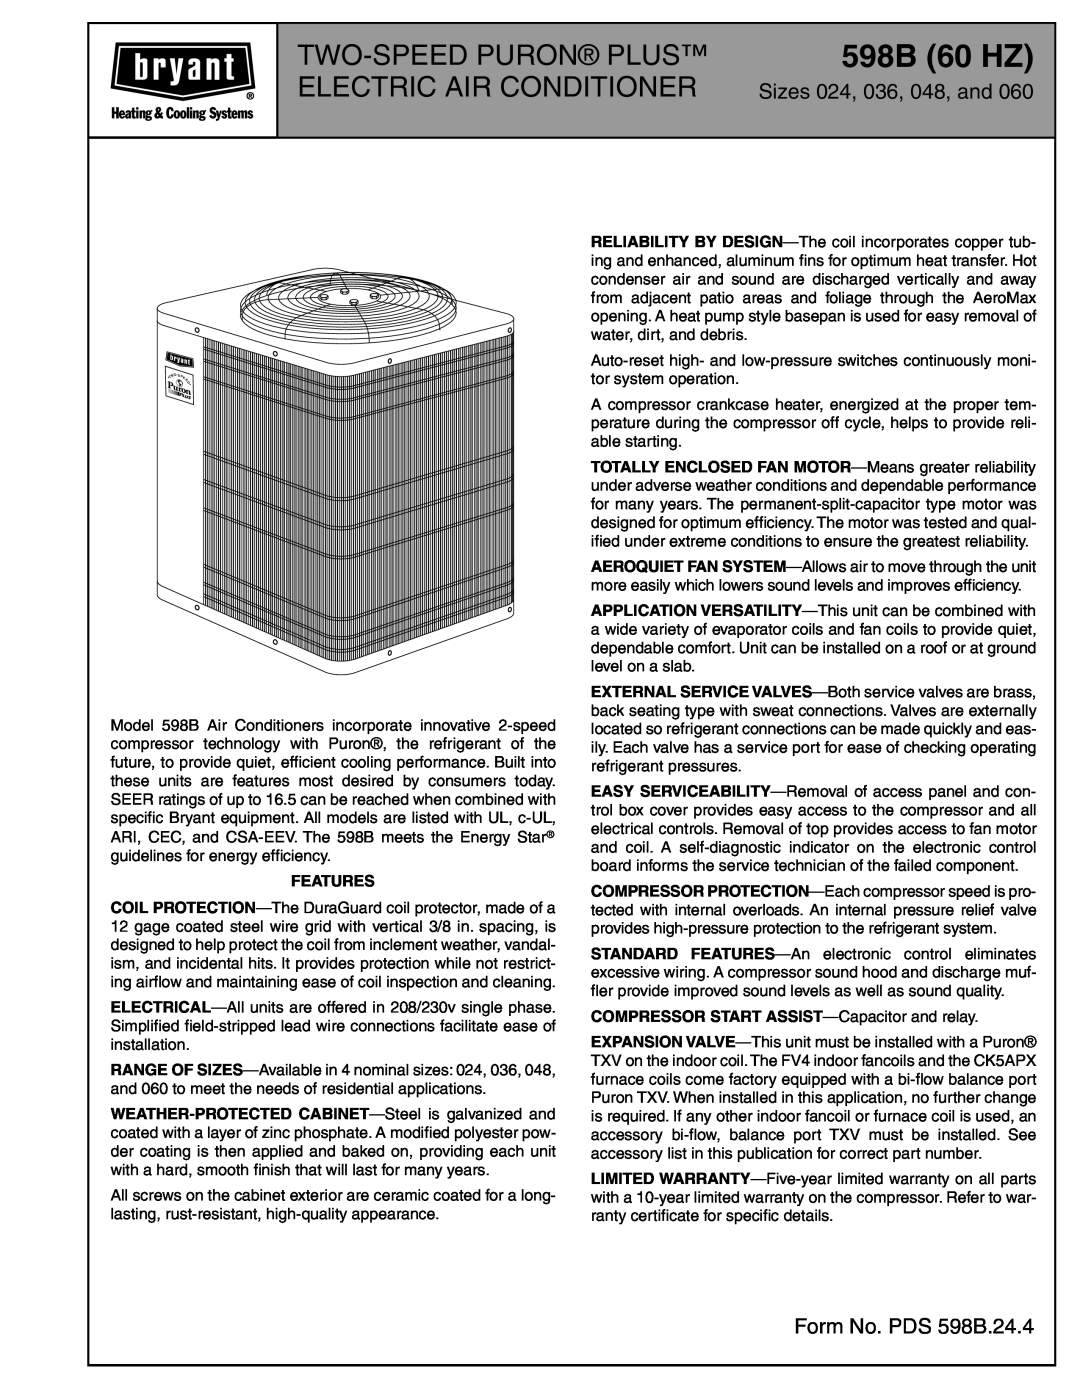 Bryant instruction manual Safety Considerations, Model 598B, Installation Recommendations, installation and 